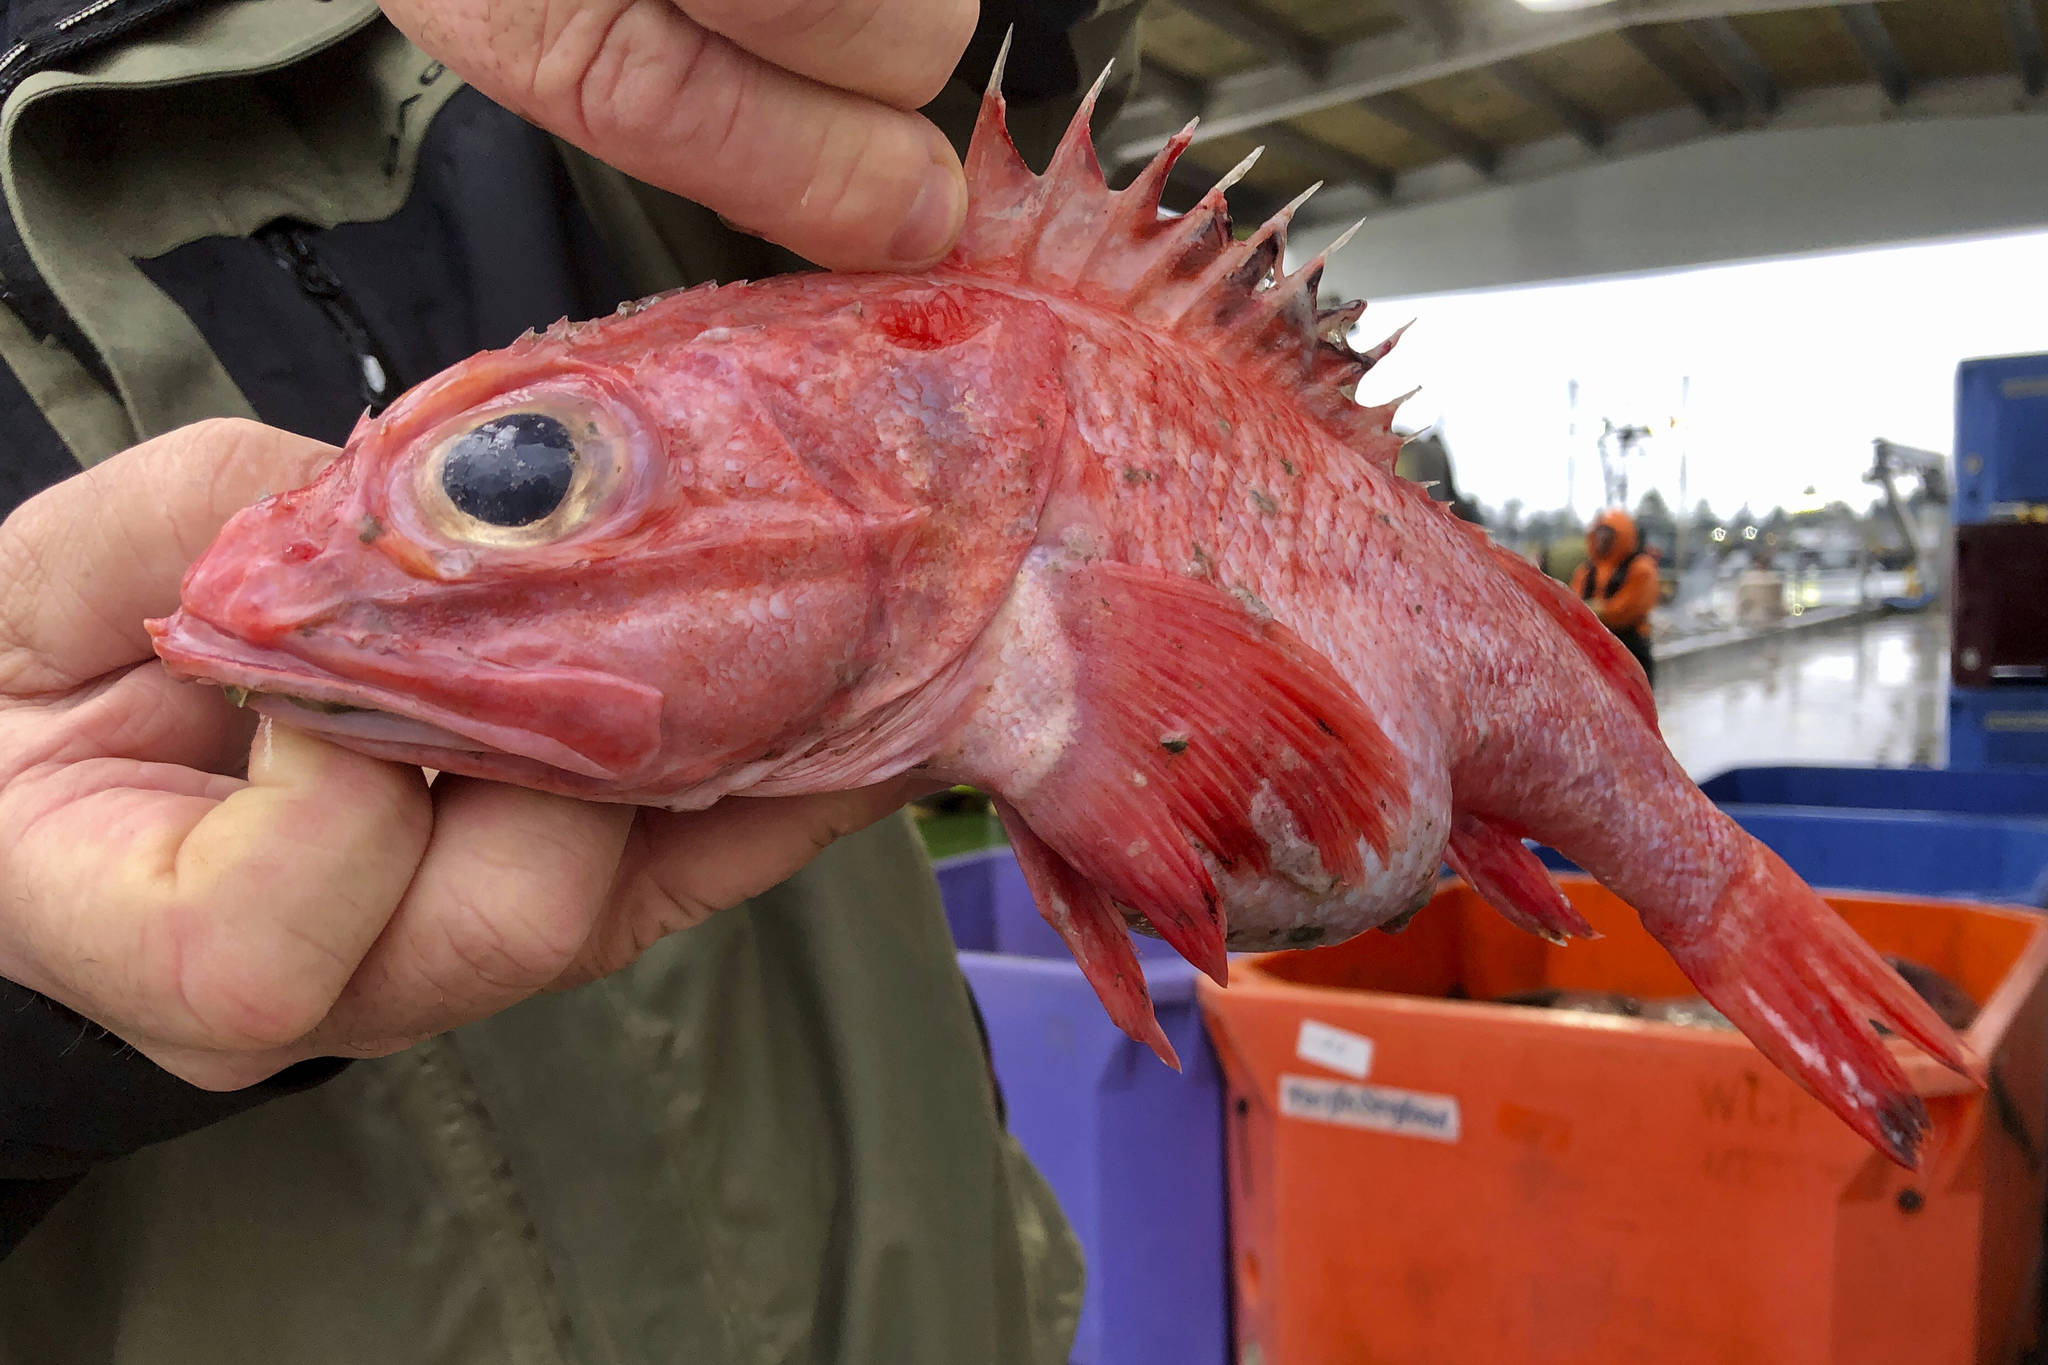 West Coast fishery rebounds in rare conservation ‘home run’